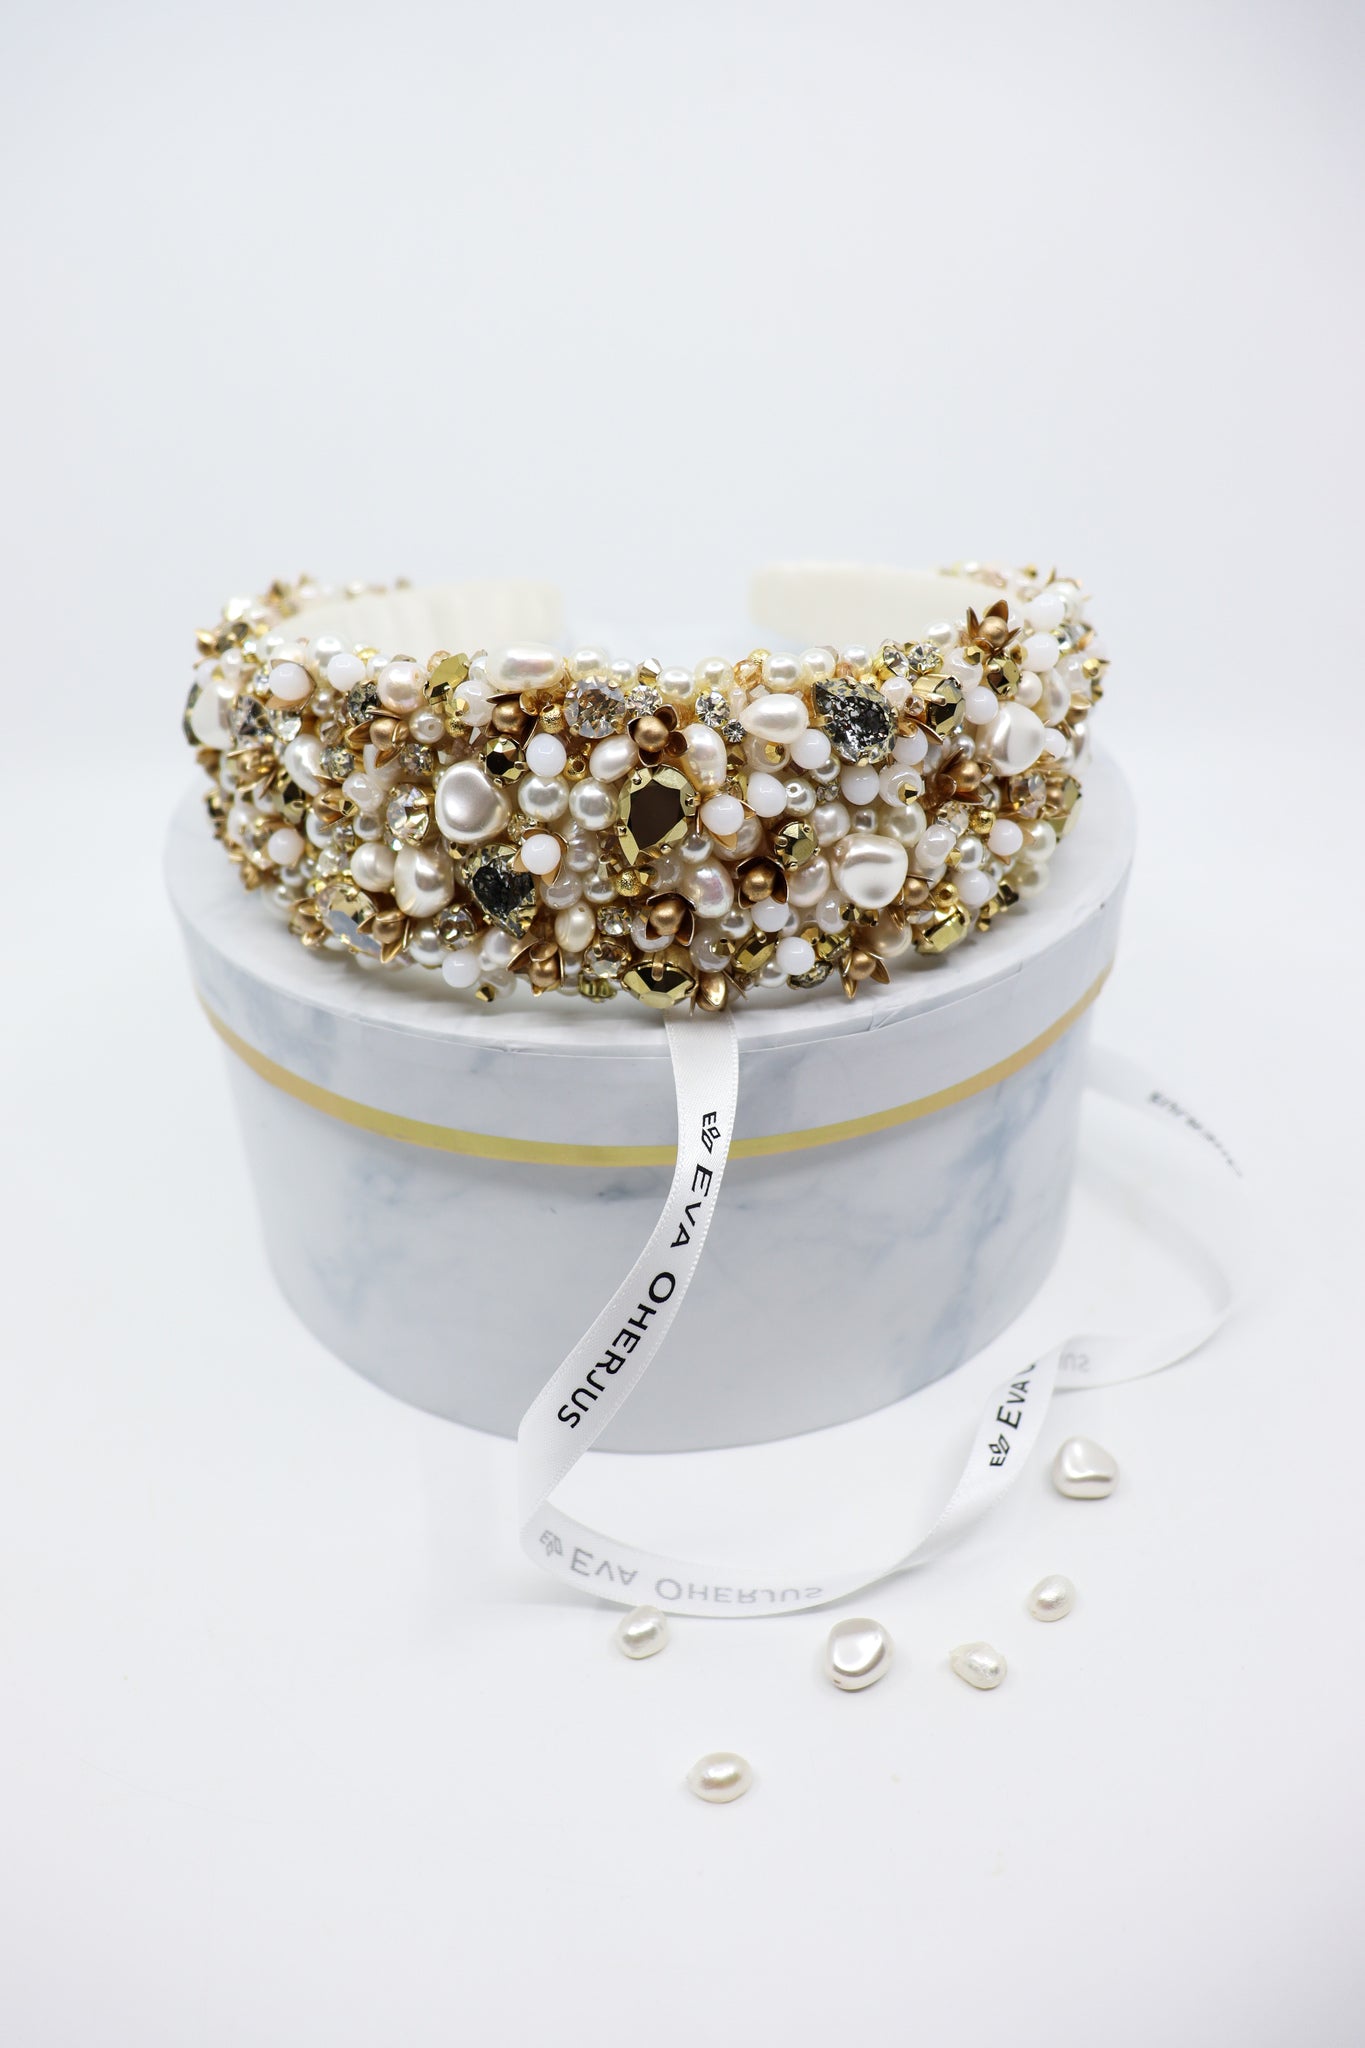 Elegant Grace Couture Head Crown - Ivory silk, Swarovski crystals, freshwater pearls, and dazzling beads. Exquisite bridal accessory for a radiant and sophisticated look.